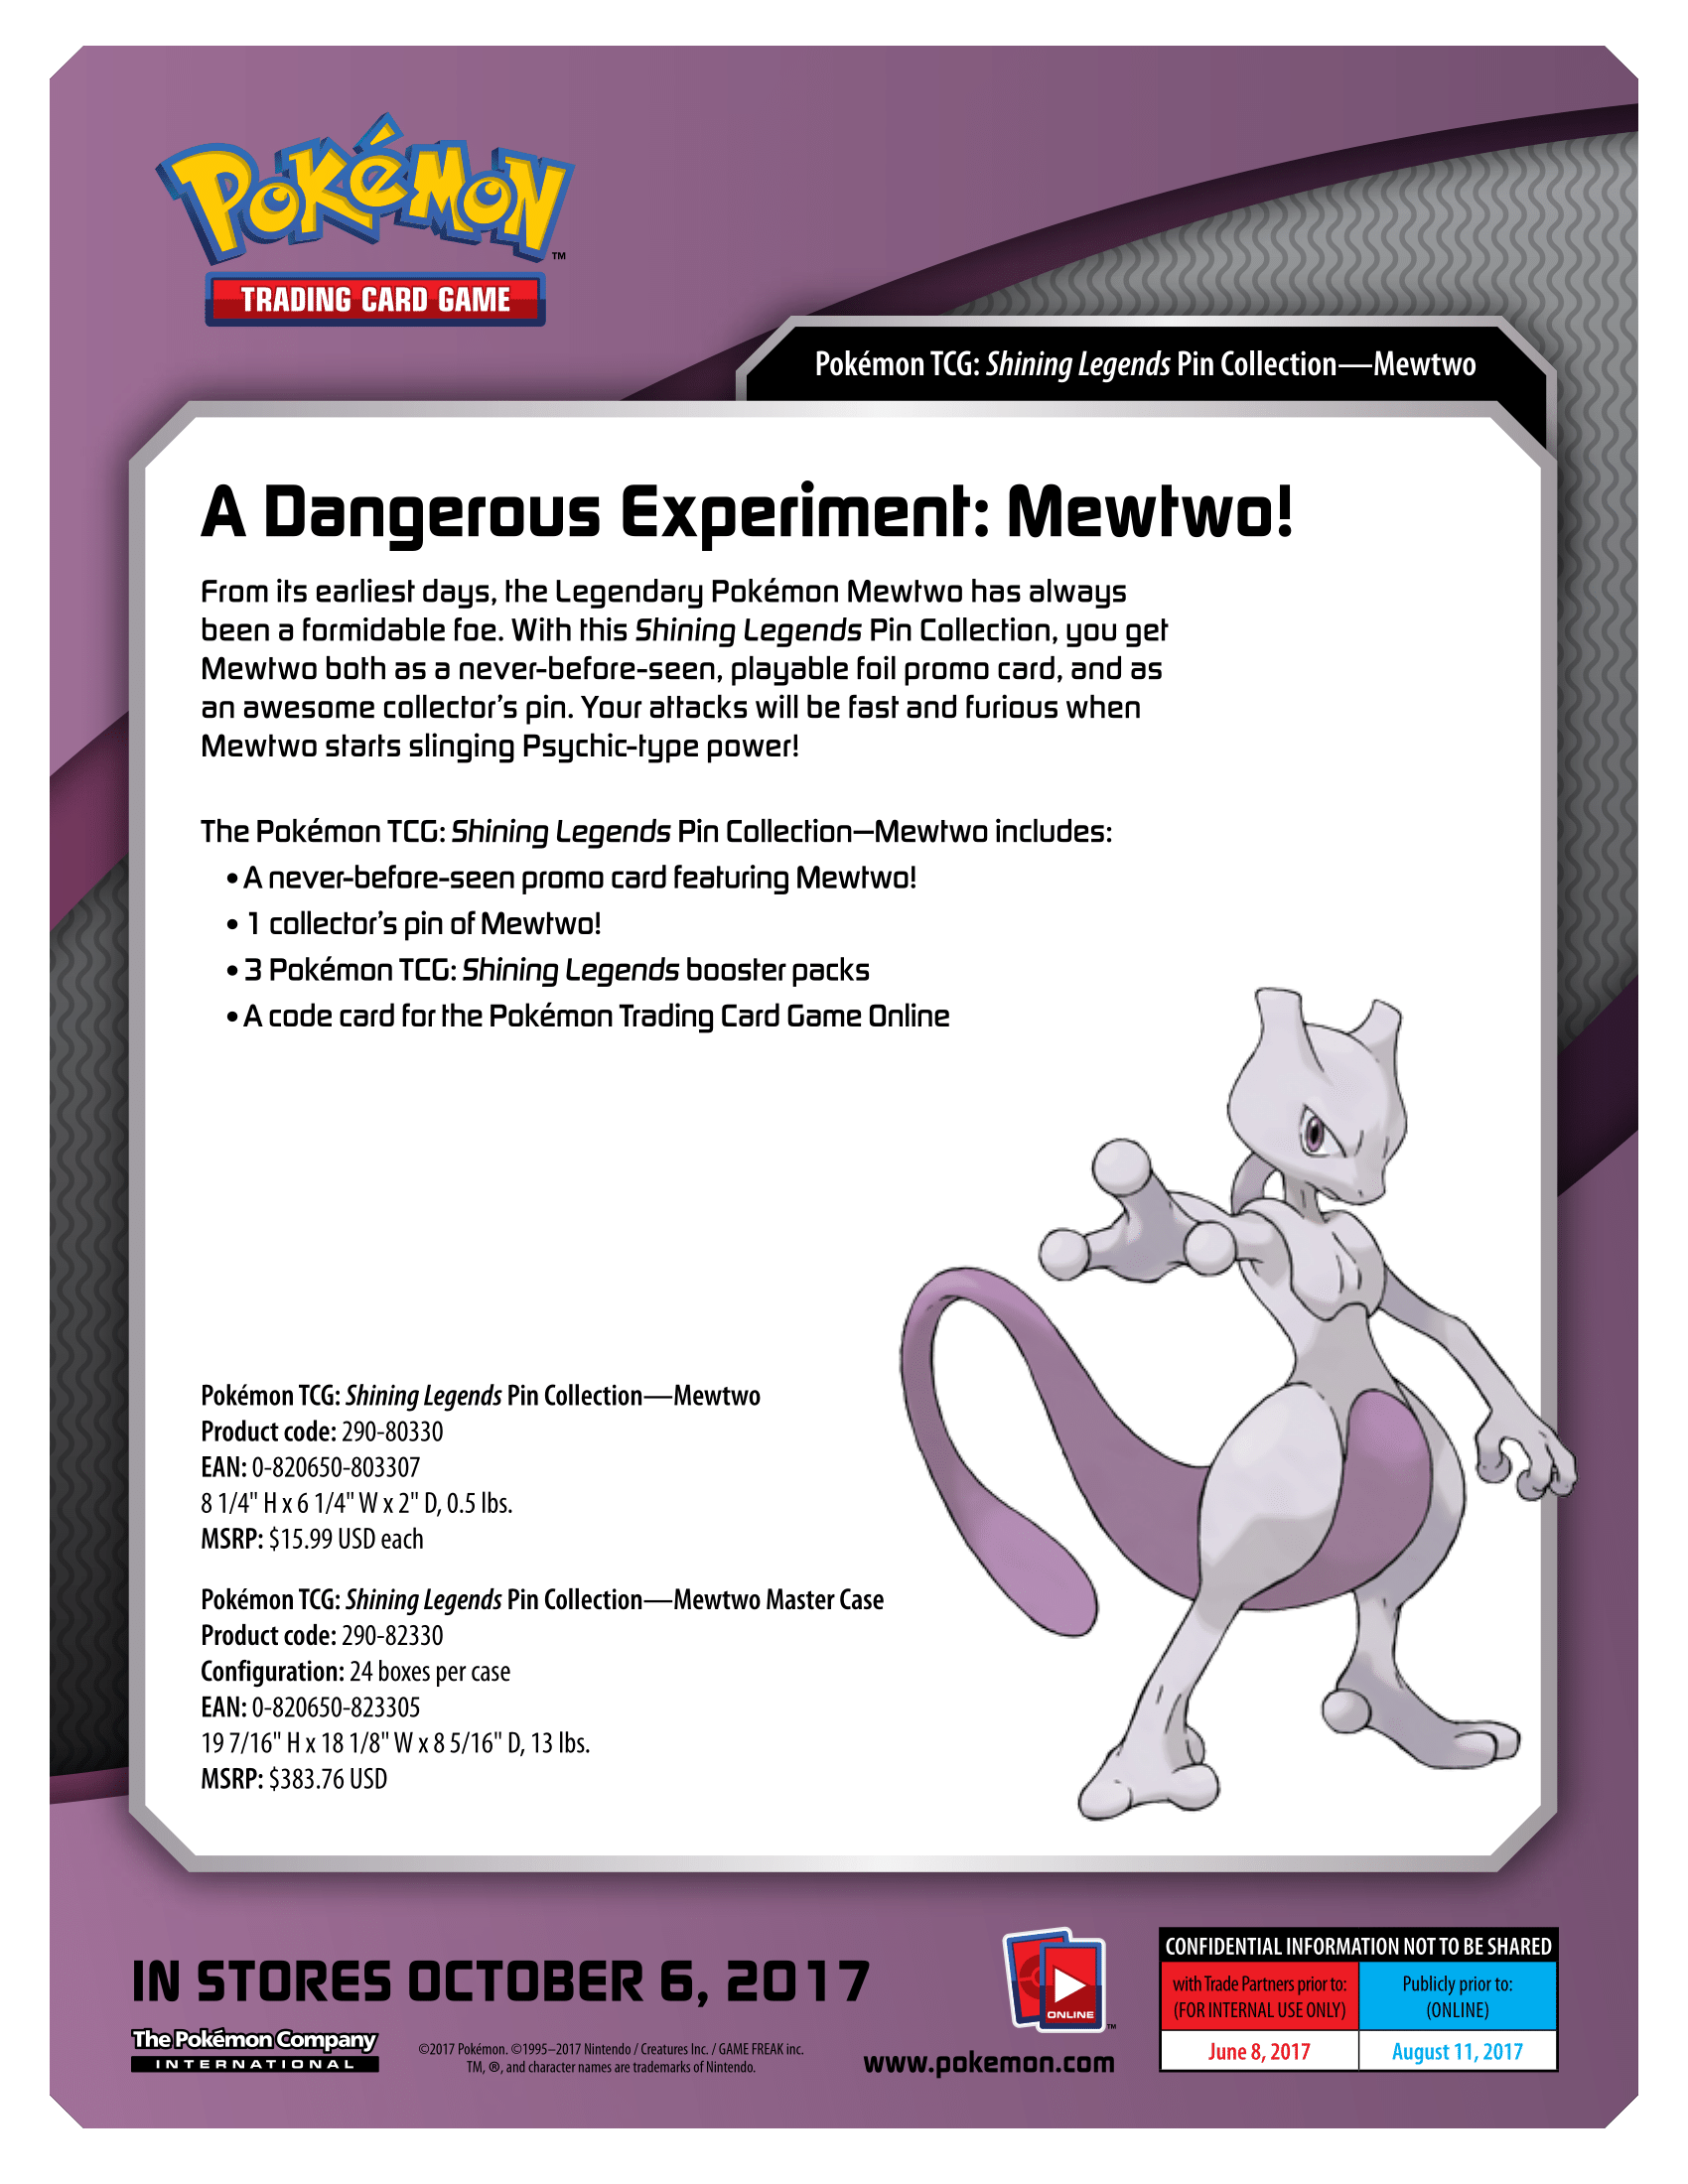 Pokemon MEWTWO October 2017 - NEW COLLECTOR'S PIN SHINING LEGENDS.